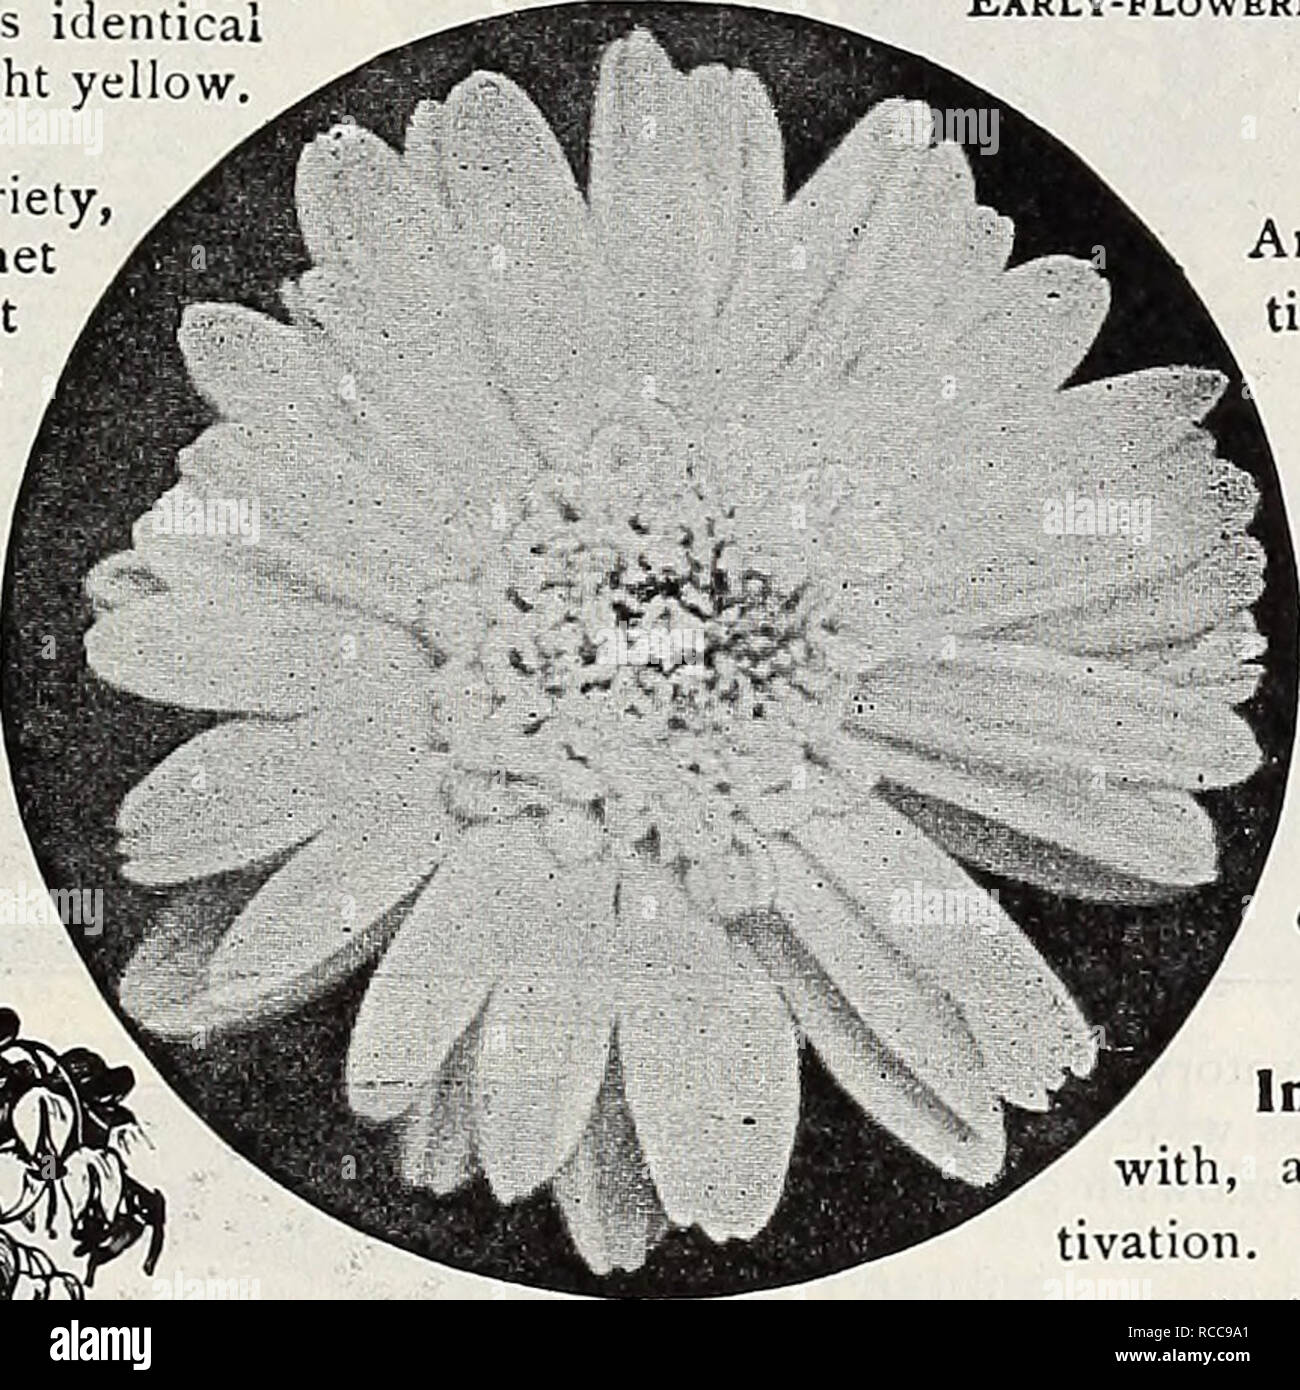 . Dreer's 1907 garden book. Seeds Catalogs; Nursery stock Catalogs; Gardening Equipment and supplies Catalogs; Flowers Seeds Catalogs; Vegetables Seeds Catalogs; Fruit Seeds Catalogs. Early-flowering Chrysanthemum Baronne Briailles. Clerodendron. CESTRUM PARQUI. (Night-blooming Jessamine.) An interesting tender shrub of easy cul- tivation, with small greenish-white flowers of delightful fragrance, which is dis- pensed during the night only. 15 cts. each; $1.50 per doz. CISSXJS. Discolor. A beautiful climber for the conservatory, with mottled and marbled crimson and green foliage. 25 cts. each; Stock Photo